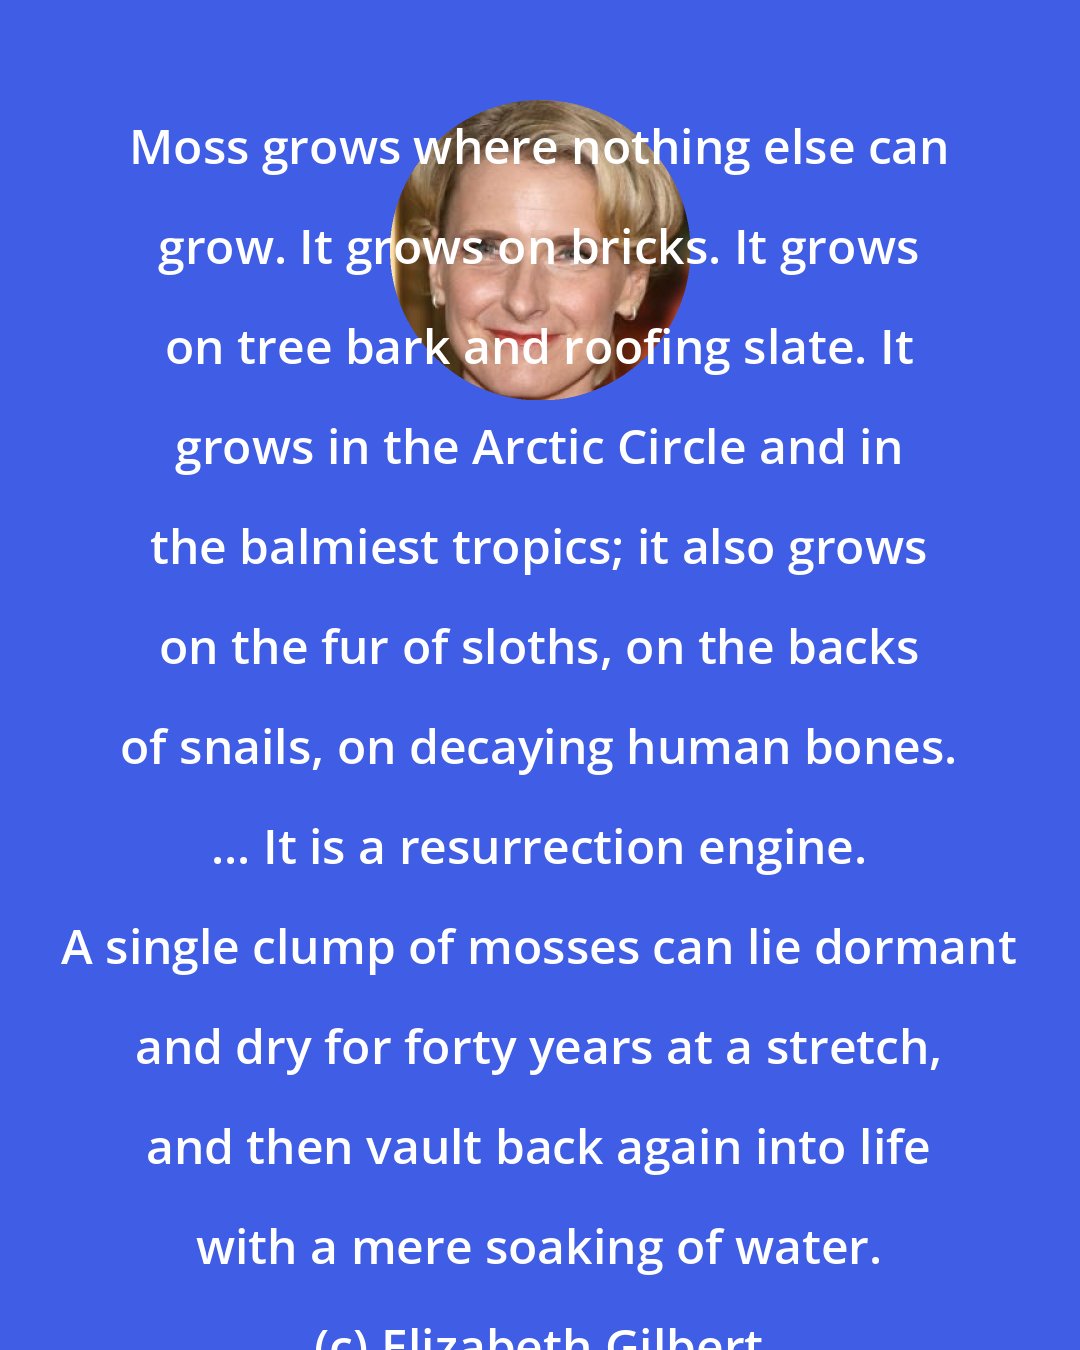 Elizabeth Gilbert: Moss grows where nothing else can grow. It grows on bricks. It grows on tree bark and roofing slate. It grows in the Arctic Circle and in the balmiest tropics; it also grows on the fur of sloths, on the backs of snails, on decaying human bones. ... It is a resurrection engine. A single clump of mosses can lie dormant and dry for forty years at a stretch, and then vault back again into life with a mere soaking of water.